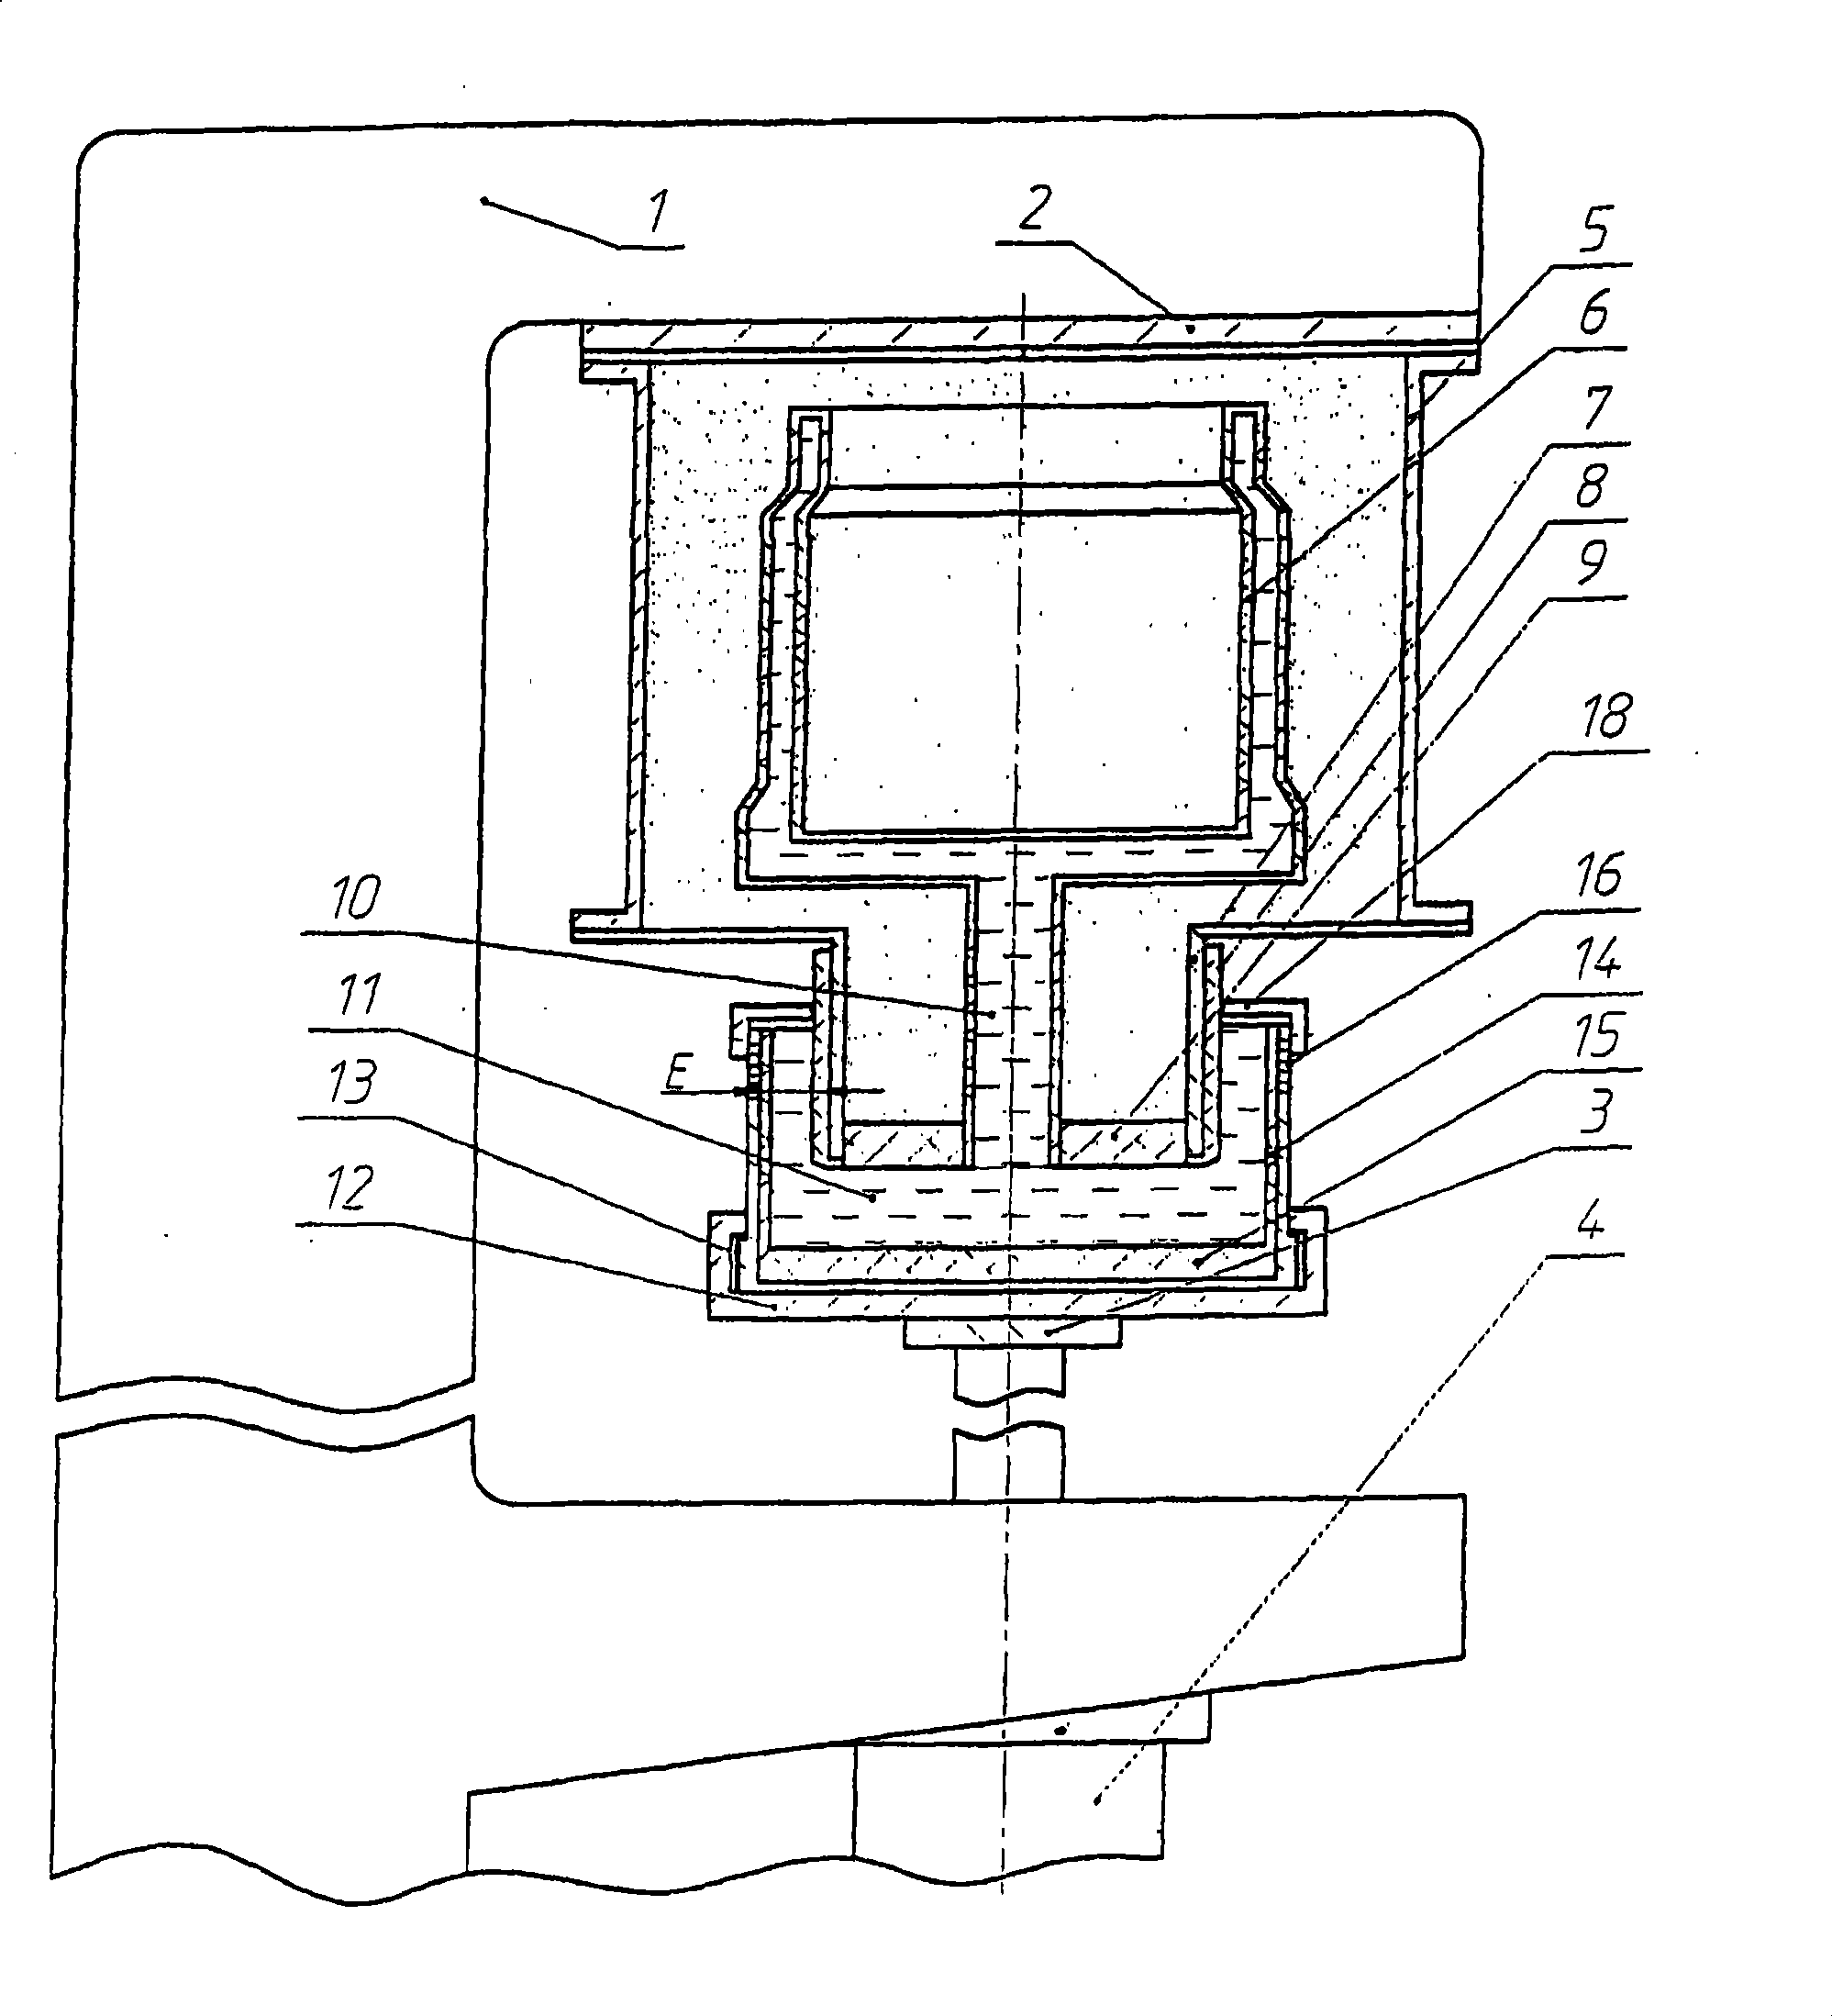 Lost-wax method associated with piezocrystallisation and a device for carrying out said method